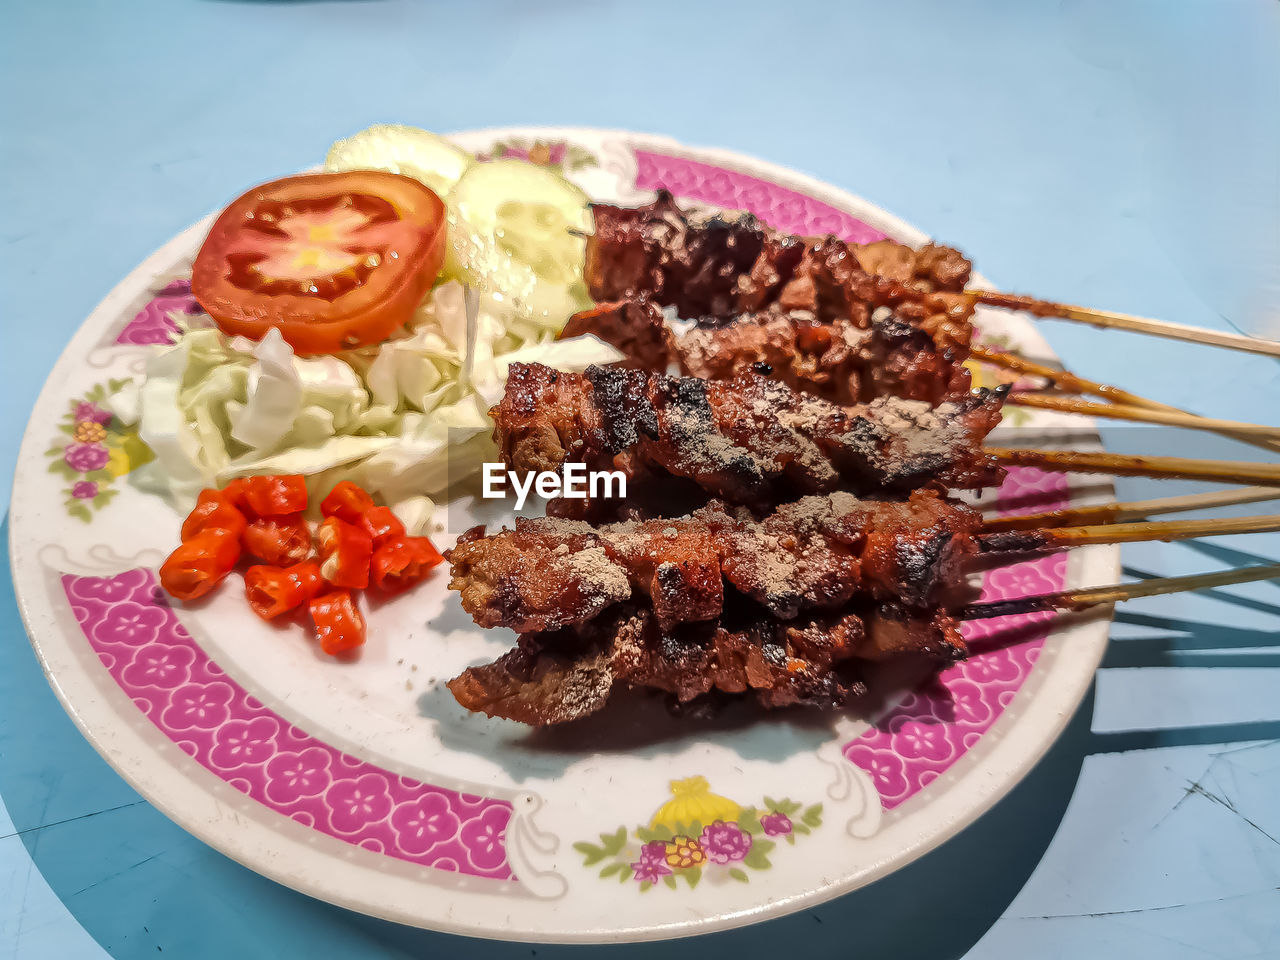 food, food and drink, plate, meat, dish, kebab, healthy eating, satay, freshness, cuisine, meal, wellbeing, vegetable, no people, brochette, indoors, arrosticini, fruit, fried, high angle view, pork, chicken, skewer, table, still life, chicken meat, produce, breakfast, barbecue